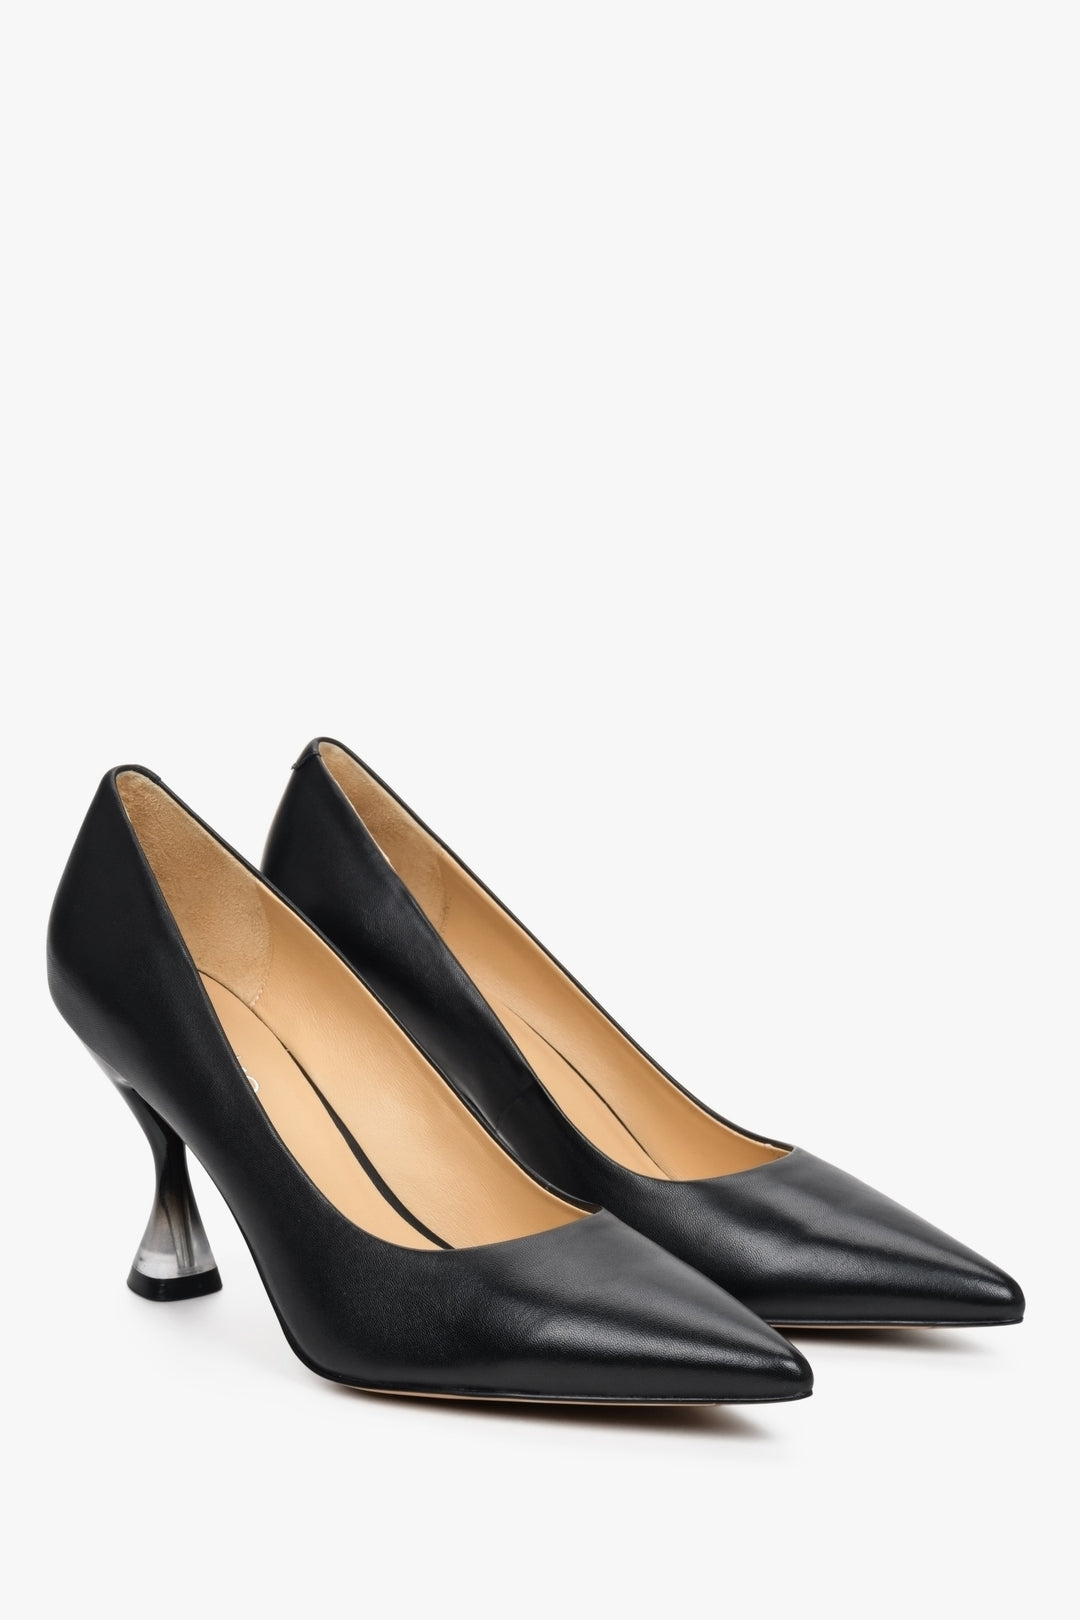 Women's black pointed high-heeled pumps - presentation of the front and side of the shoes.